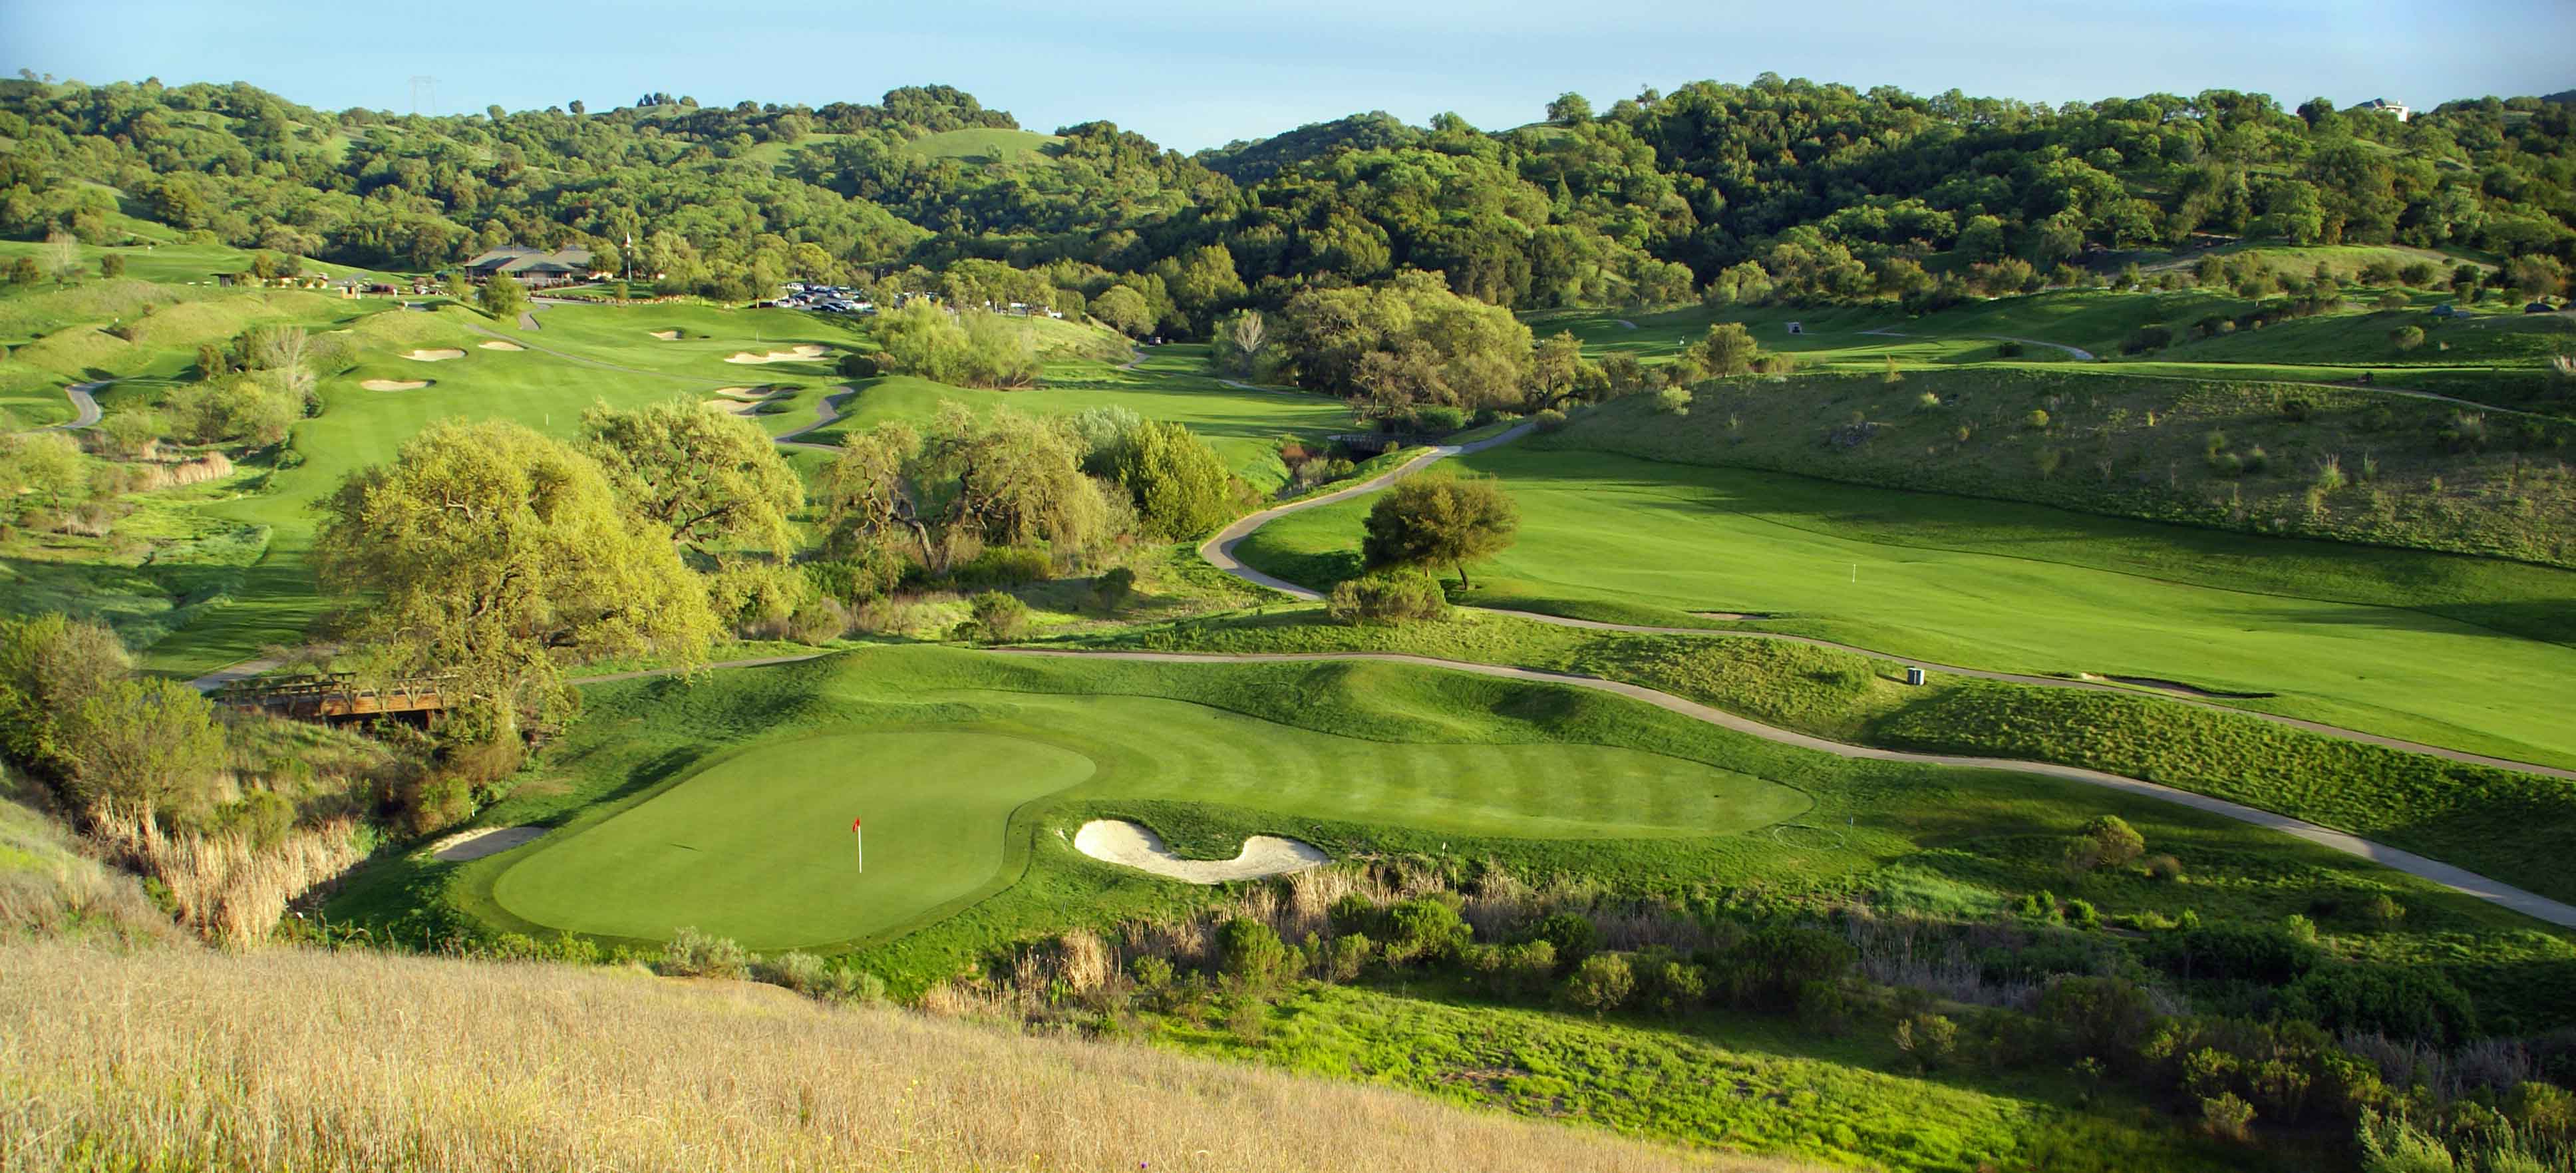 The Lake Course at Cinnabar Hills